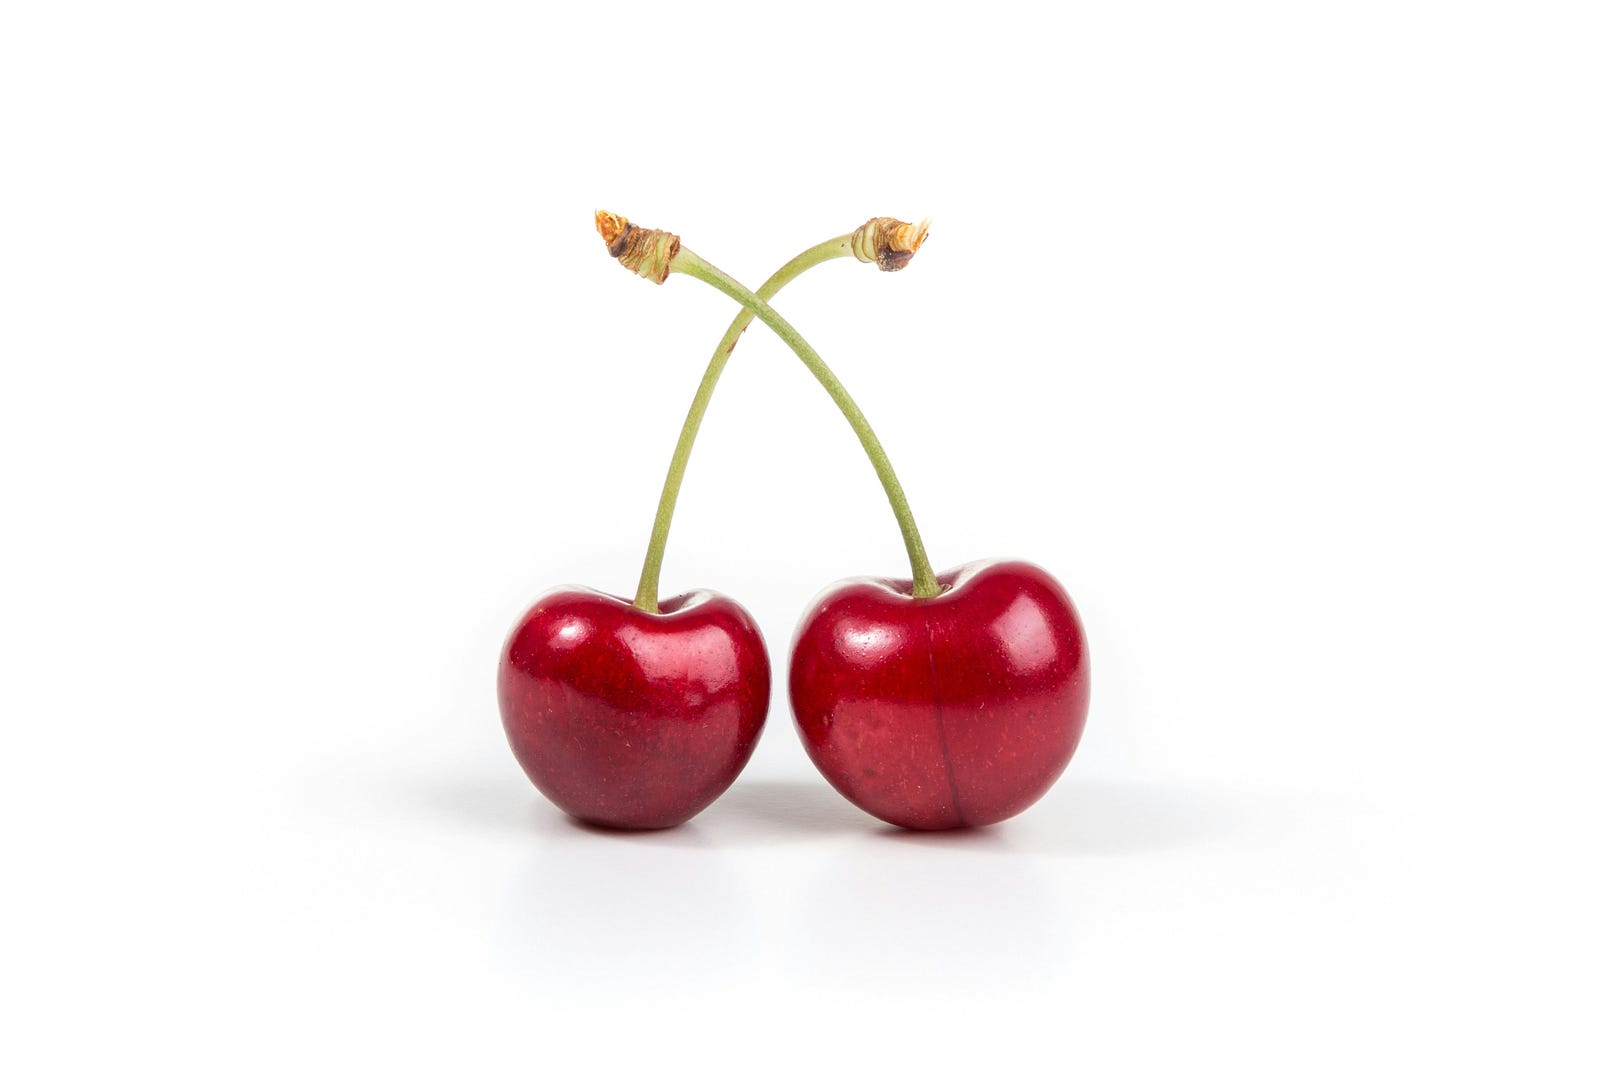 Two cherries. Fruit and vegetable consumption may lower your risk of cognitive decline.